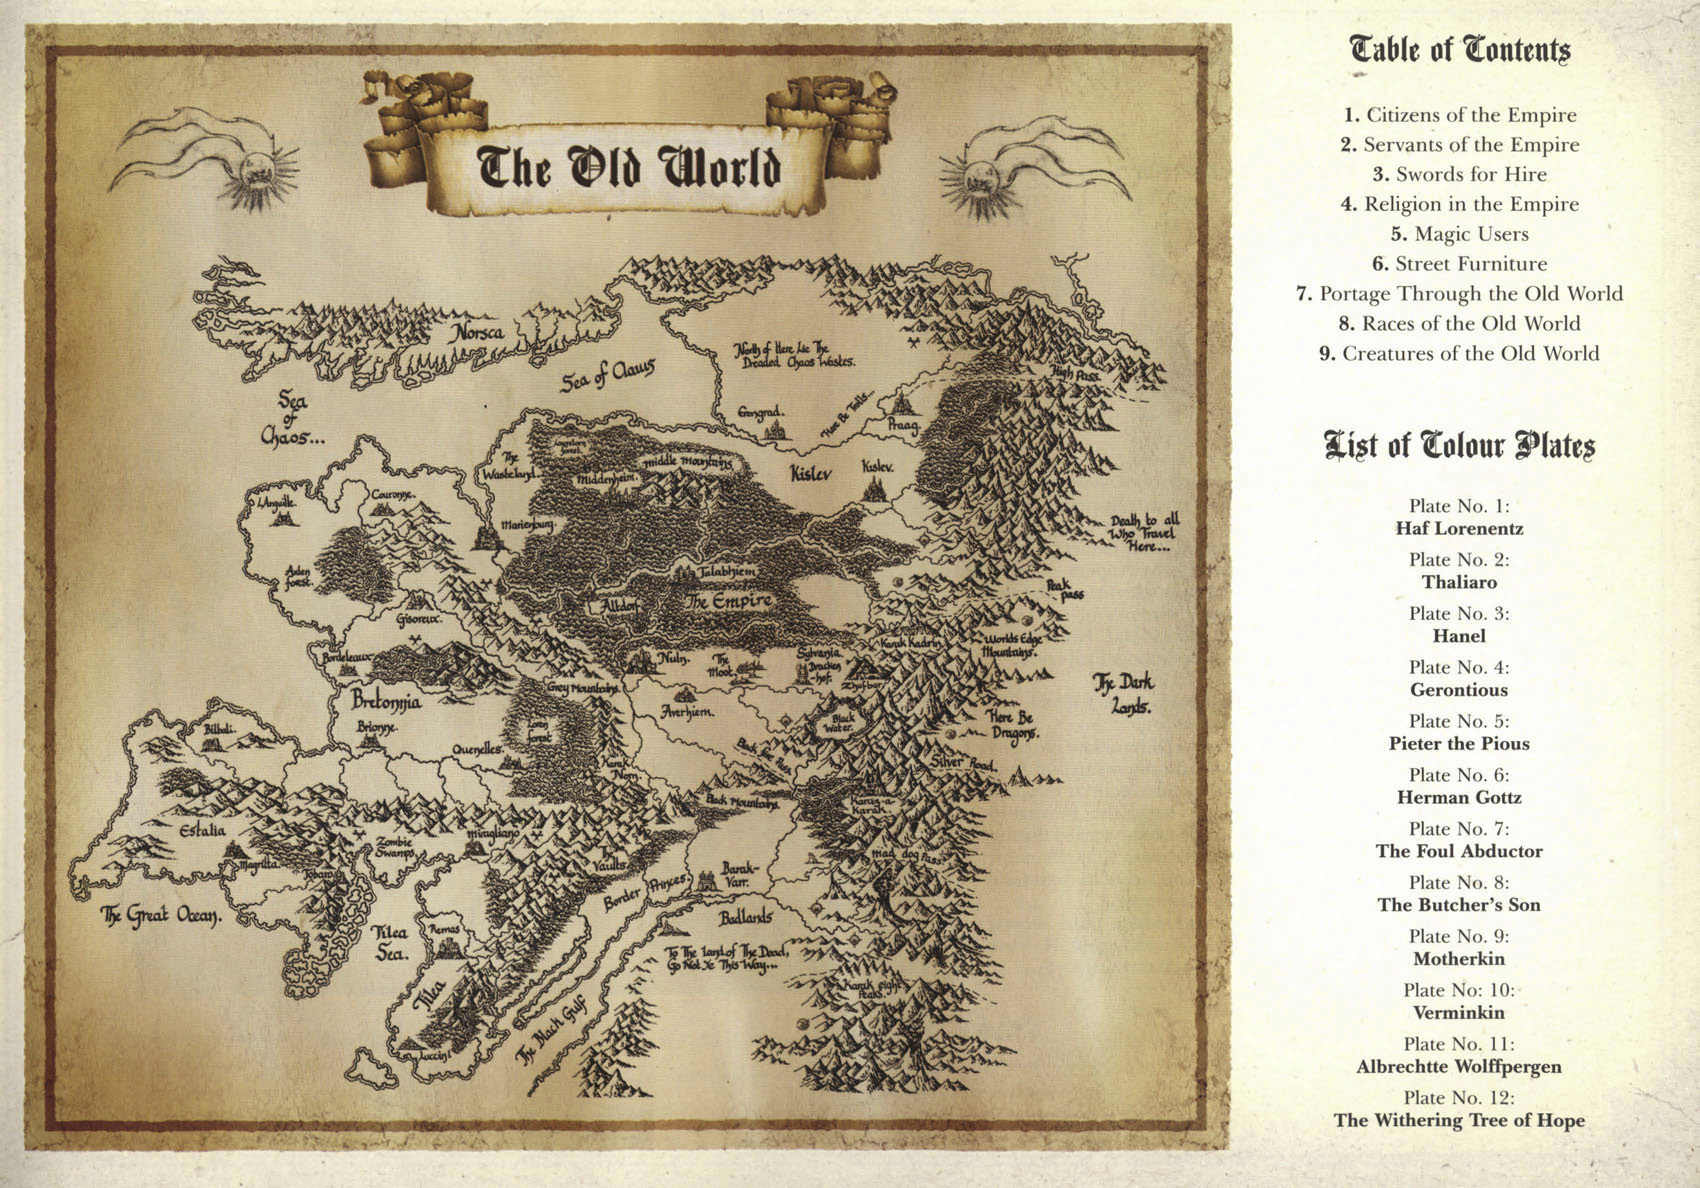 http://www.gitzmansgallery.com/maps/Map-The-Old-World-4-Color.jpg